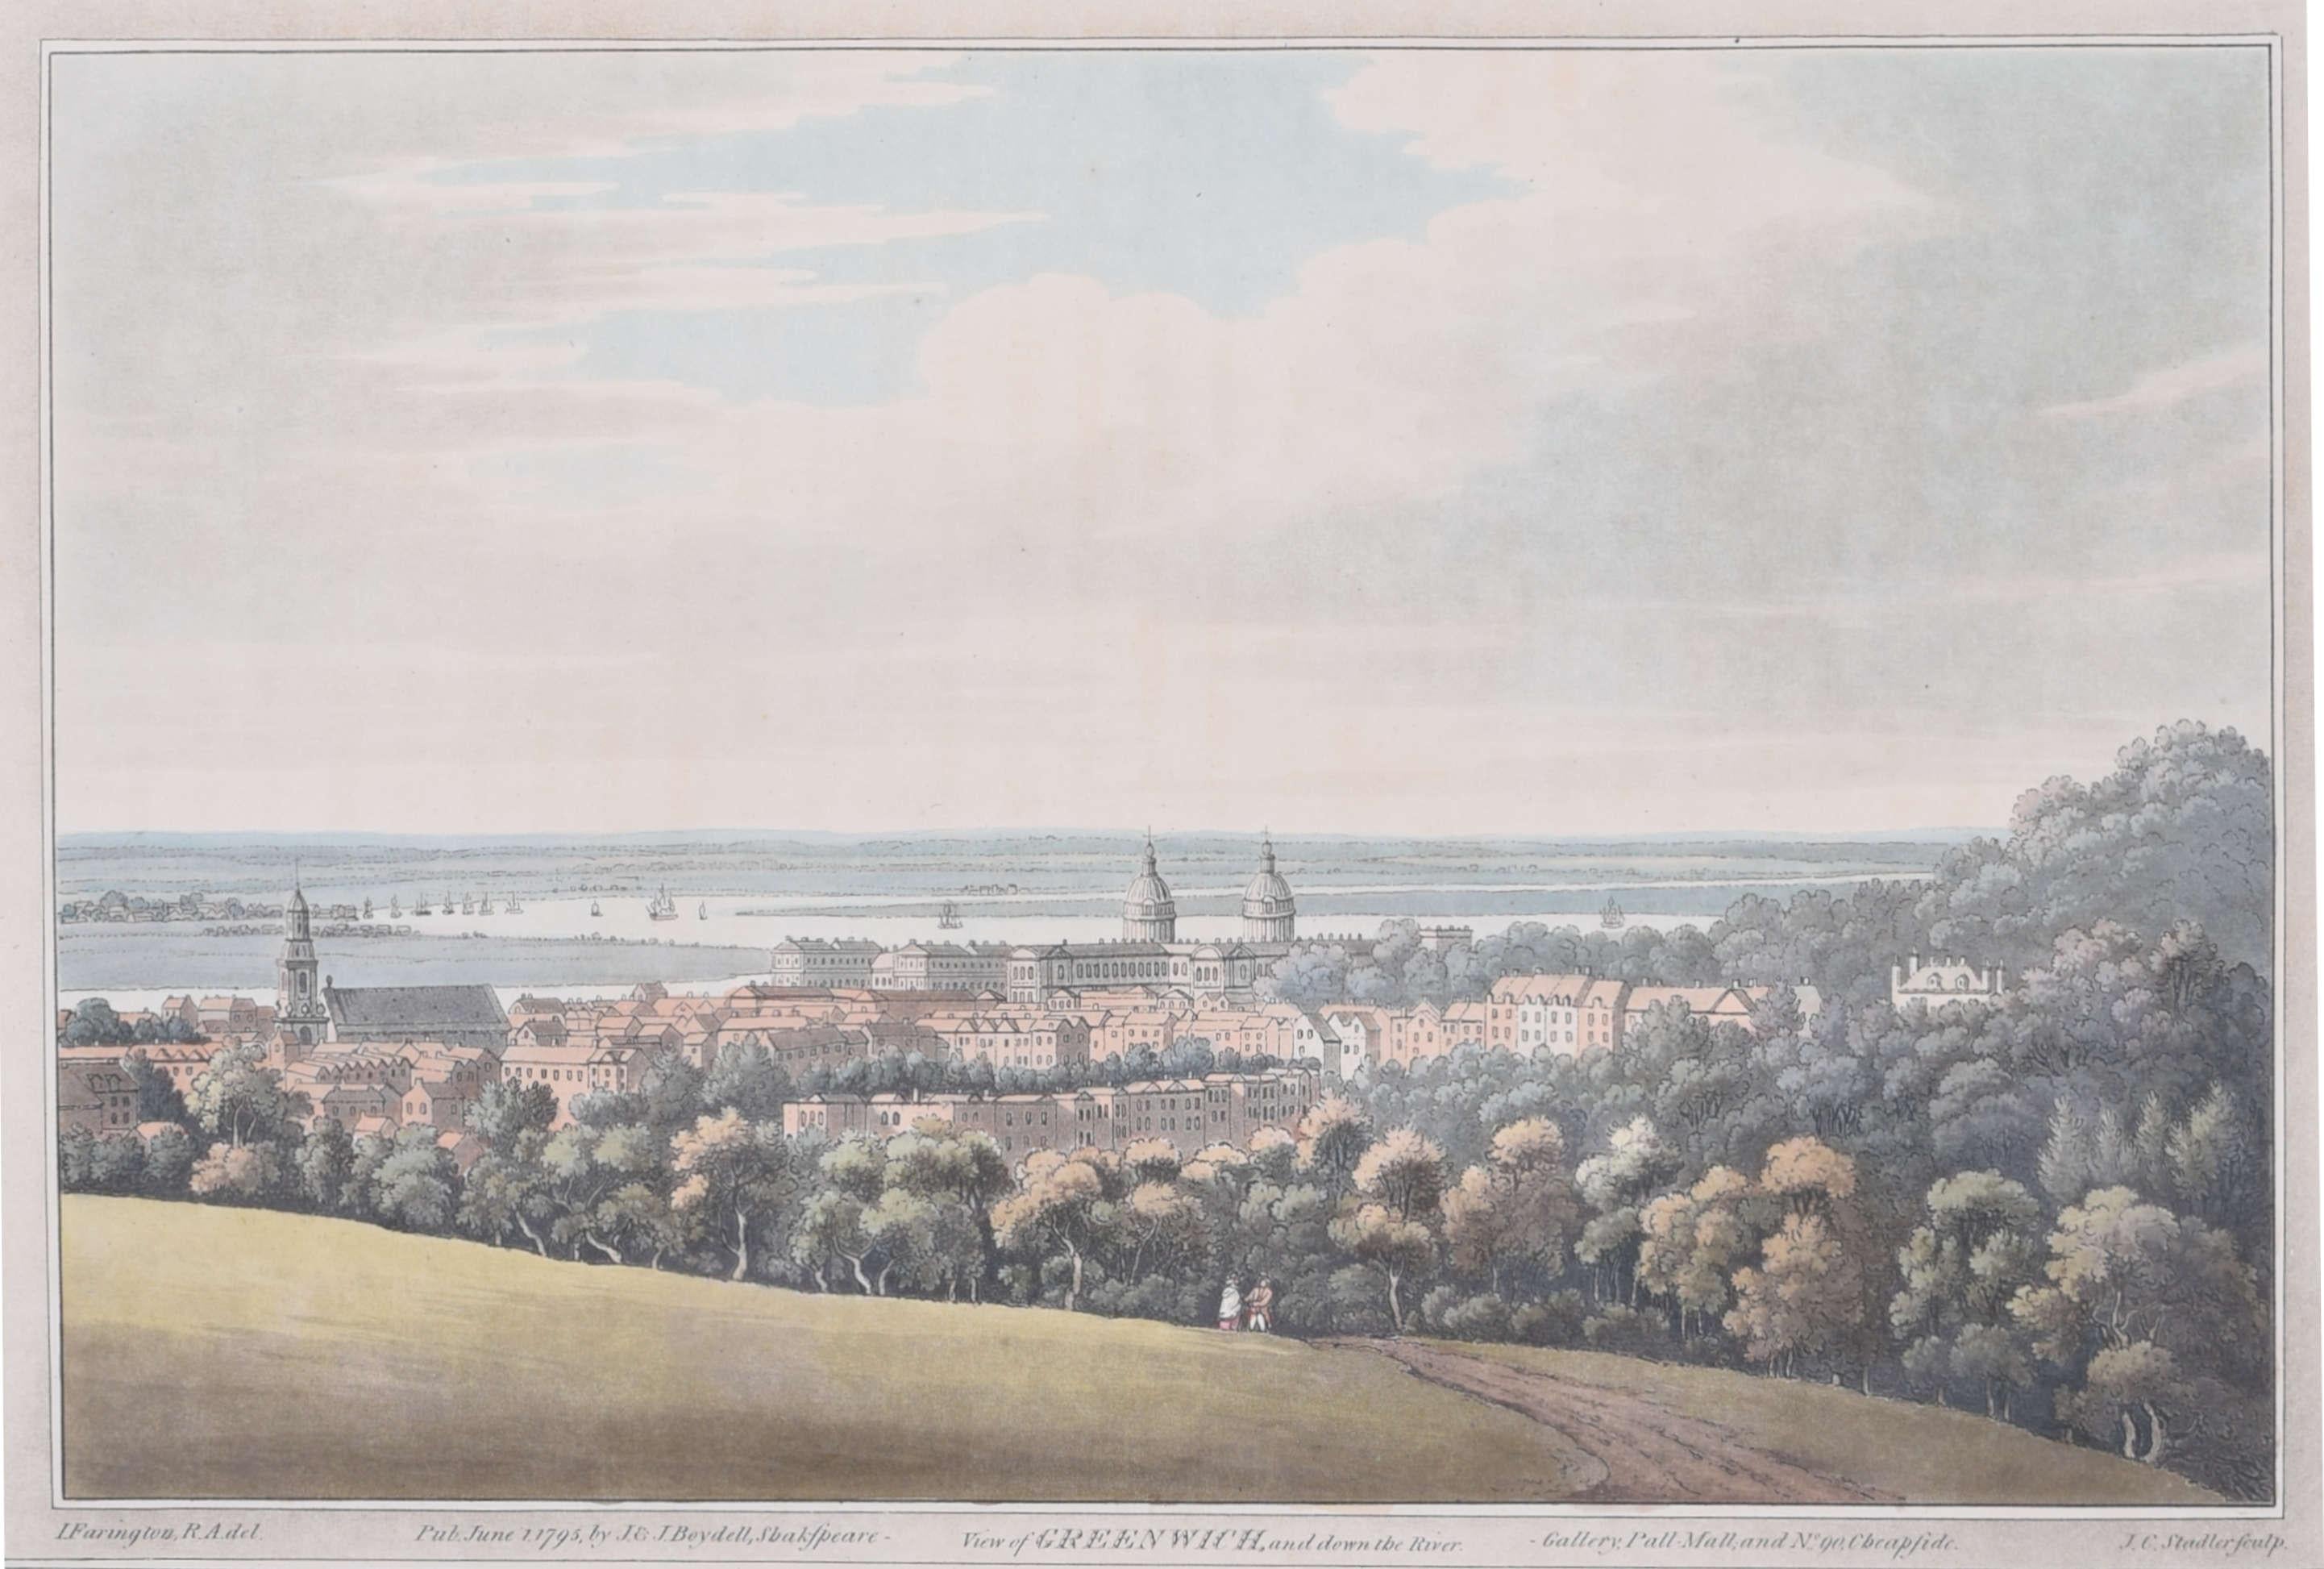 Joseph Constantine Stadler (1755 - 1828) after Joseph Farington (1747 - 1821)
View of Greenwich and Down the River (1795)
Hand-coloured engraving
23 x 33 cm

Joseph Constantine Stadler was a prolific German émigré engraver of images after his